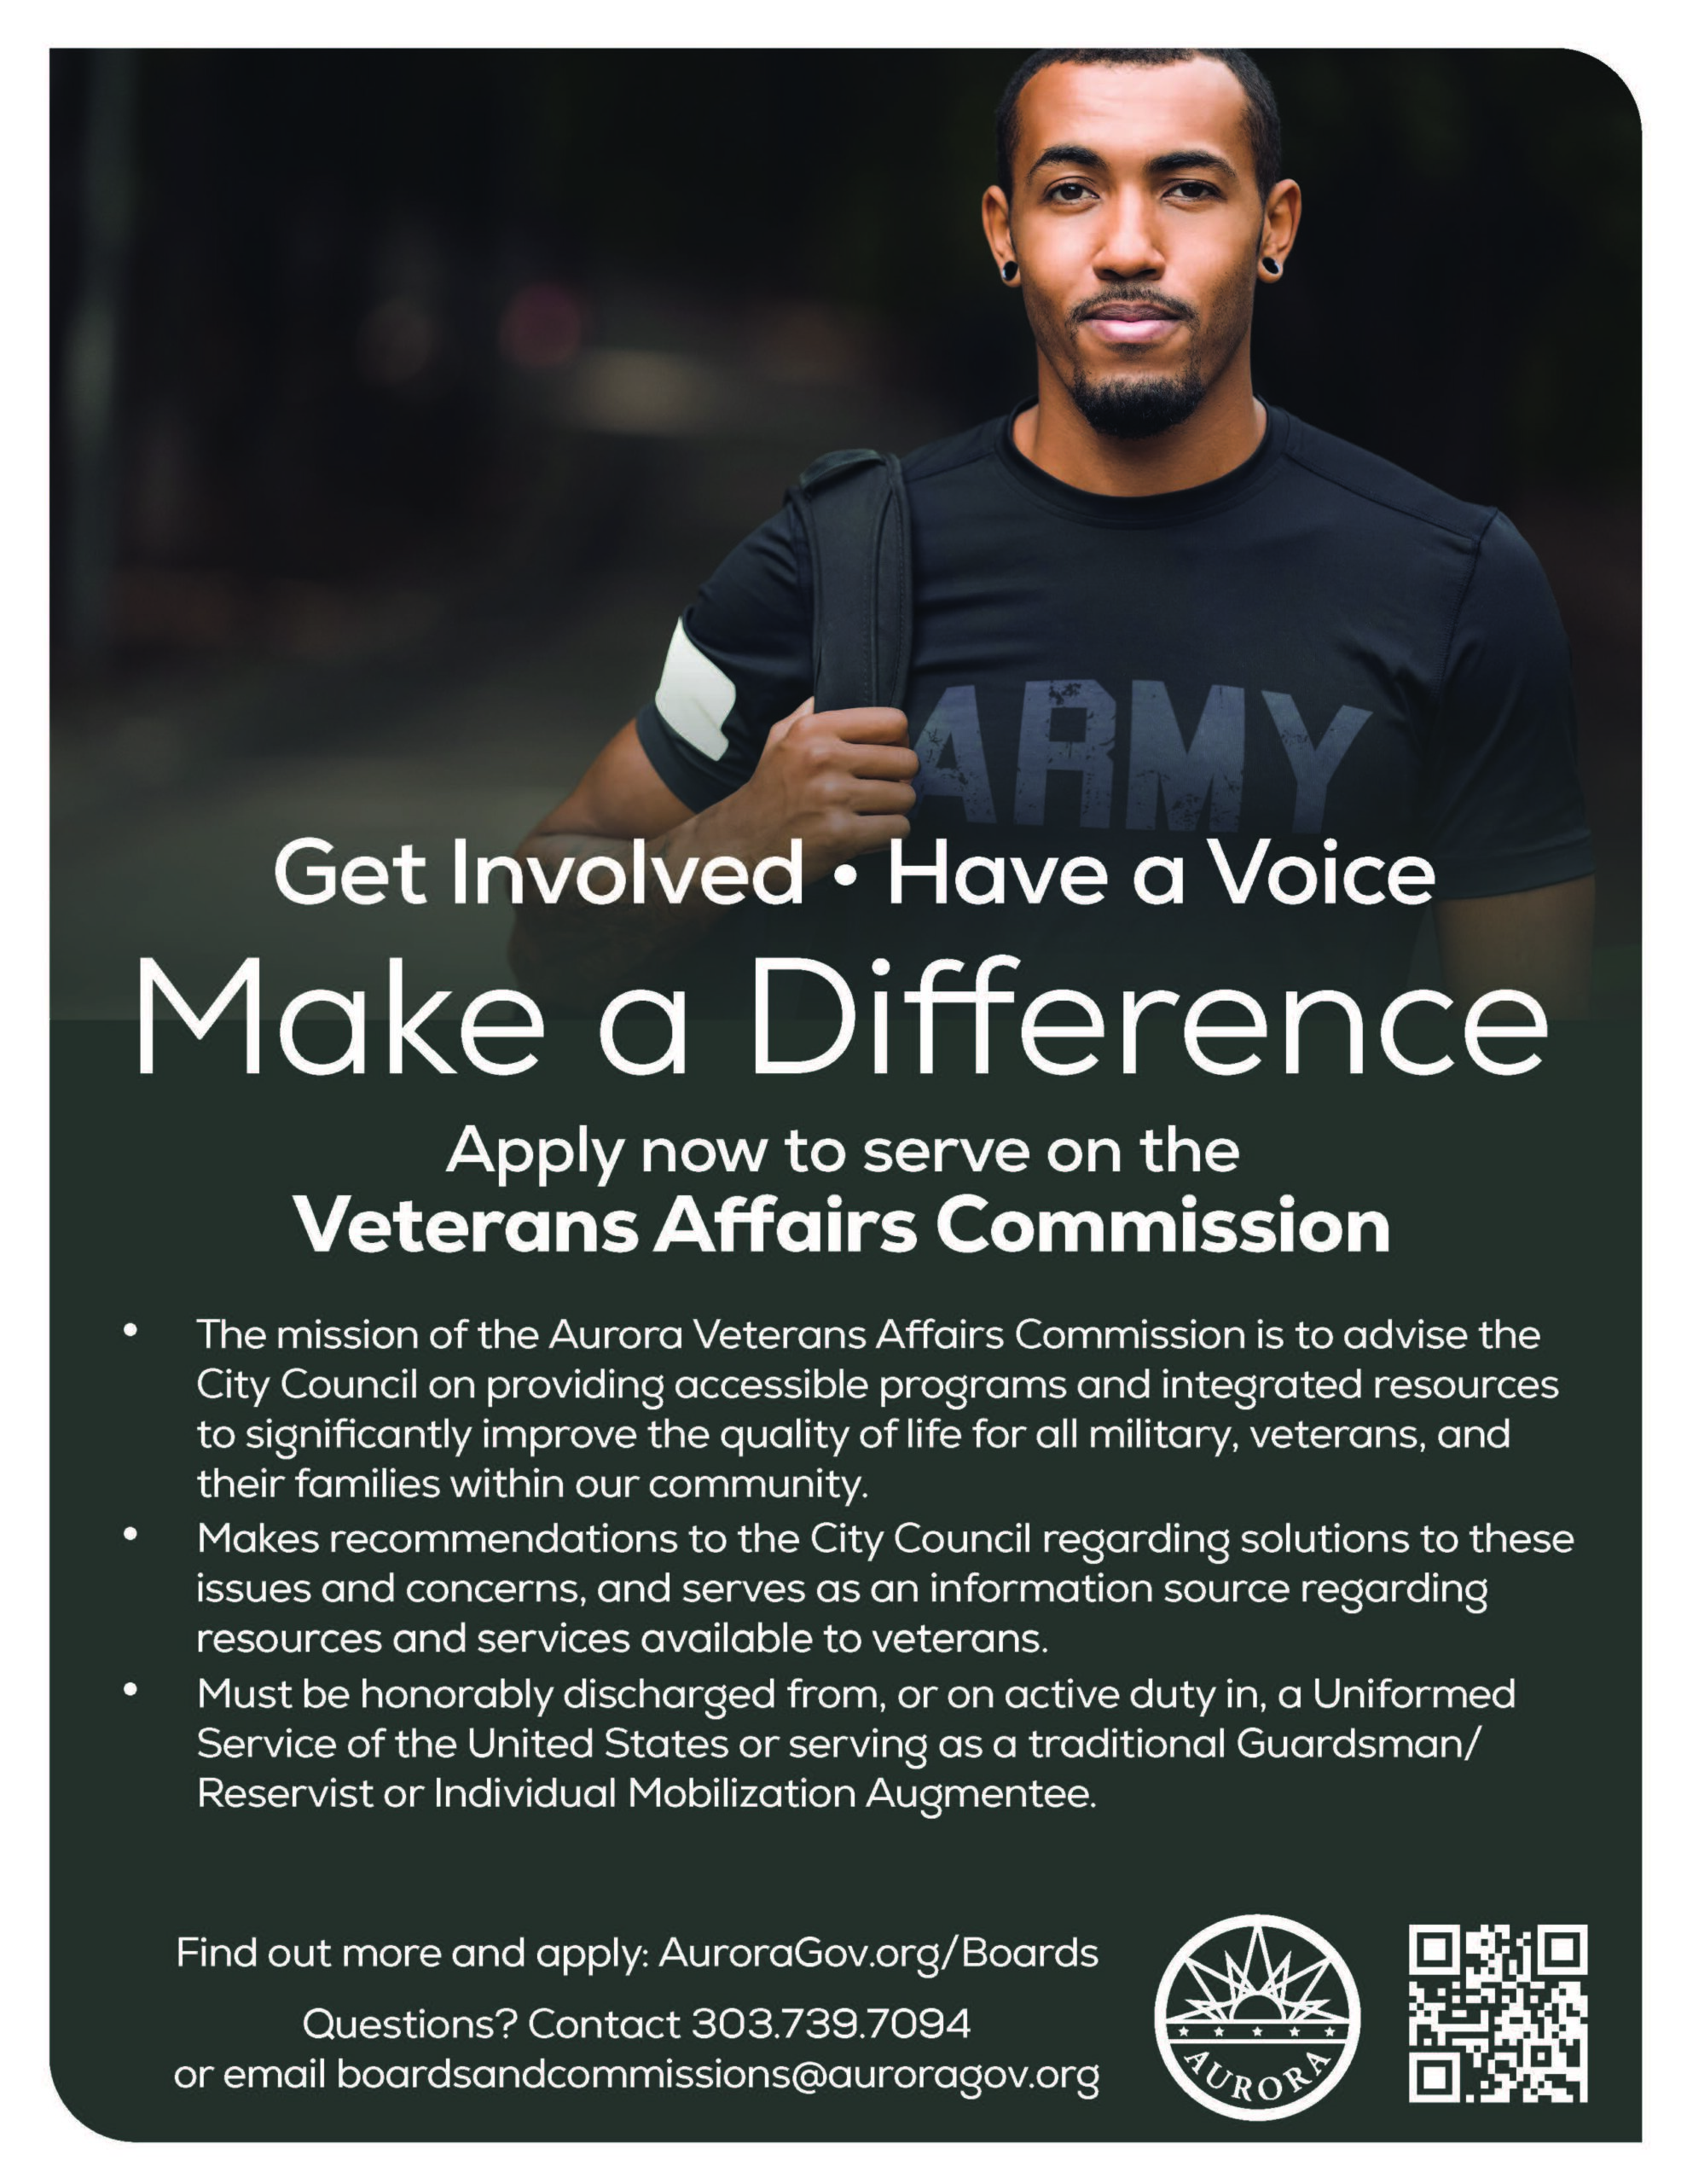 Makes recommendations to the City Council regarding solutions to these issues and concerns, and serves as an information source regarding resources and services available to veterans.
Find out more at AuroraGov.org/Boards
Call (303)739-7094
Or email boardsandcommissions@auroragov.org